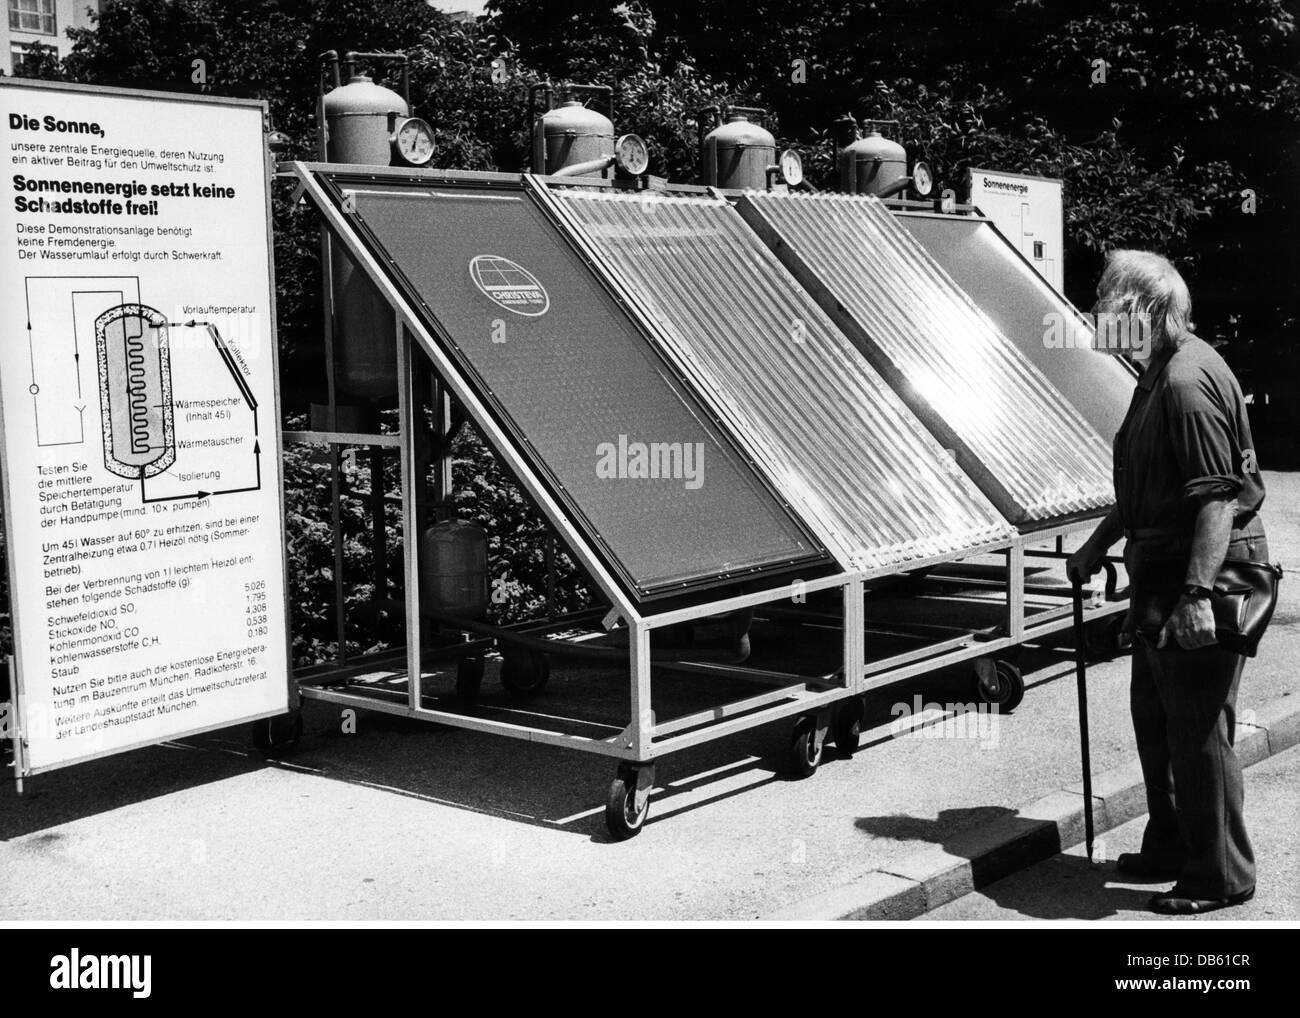 energy,solar energy,advertising for solar energy,Umwelttag  Marienhof,Munich,1986,old,man,men,solar collectors,solar collector,information,info,technics,technologies,preventive environmental protection,for environmental reasons,renewable energies,regenerative,photovoltaic cell,solar cells,photovoltaic cells,multijunction solar cell,invention,inventions,generations,solar energy,environment engineering,environmental technology,electricity,generation of current,electricity generation,power generation,energies,solar energy,solar po,Additional-Rights-Clearences-Not Available Stock Photo